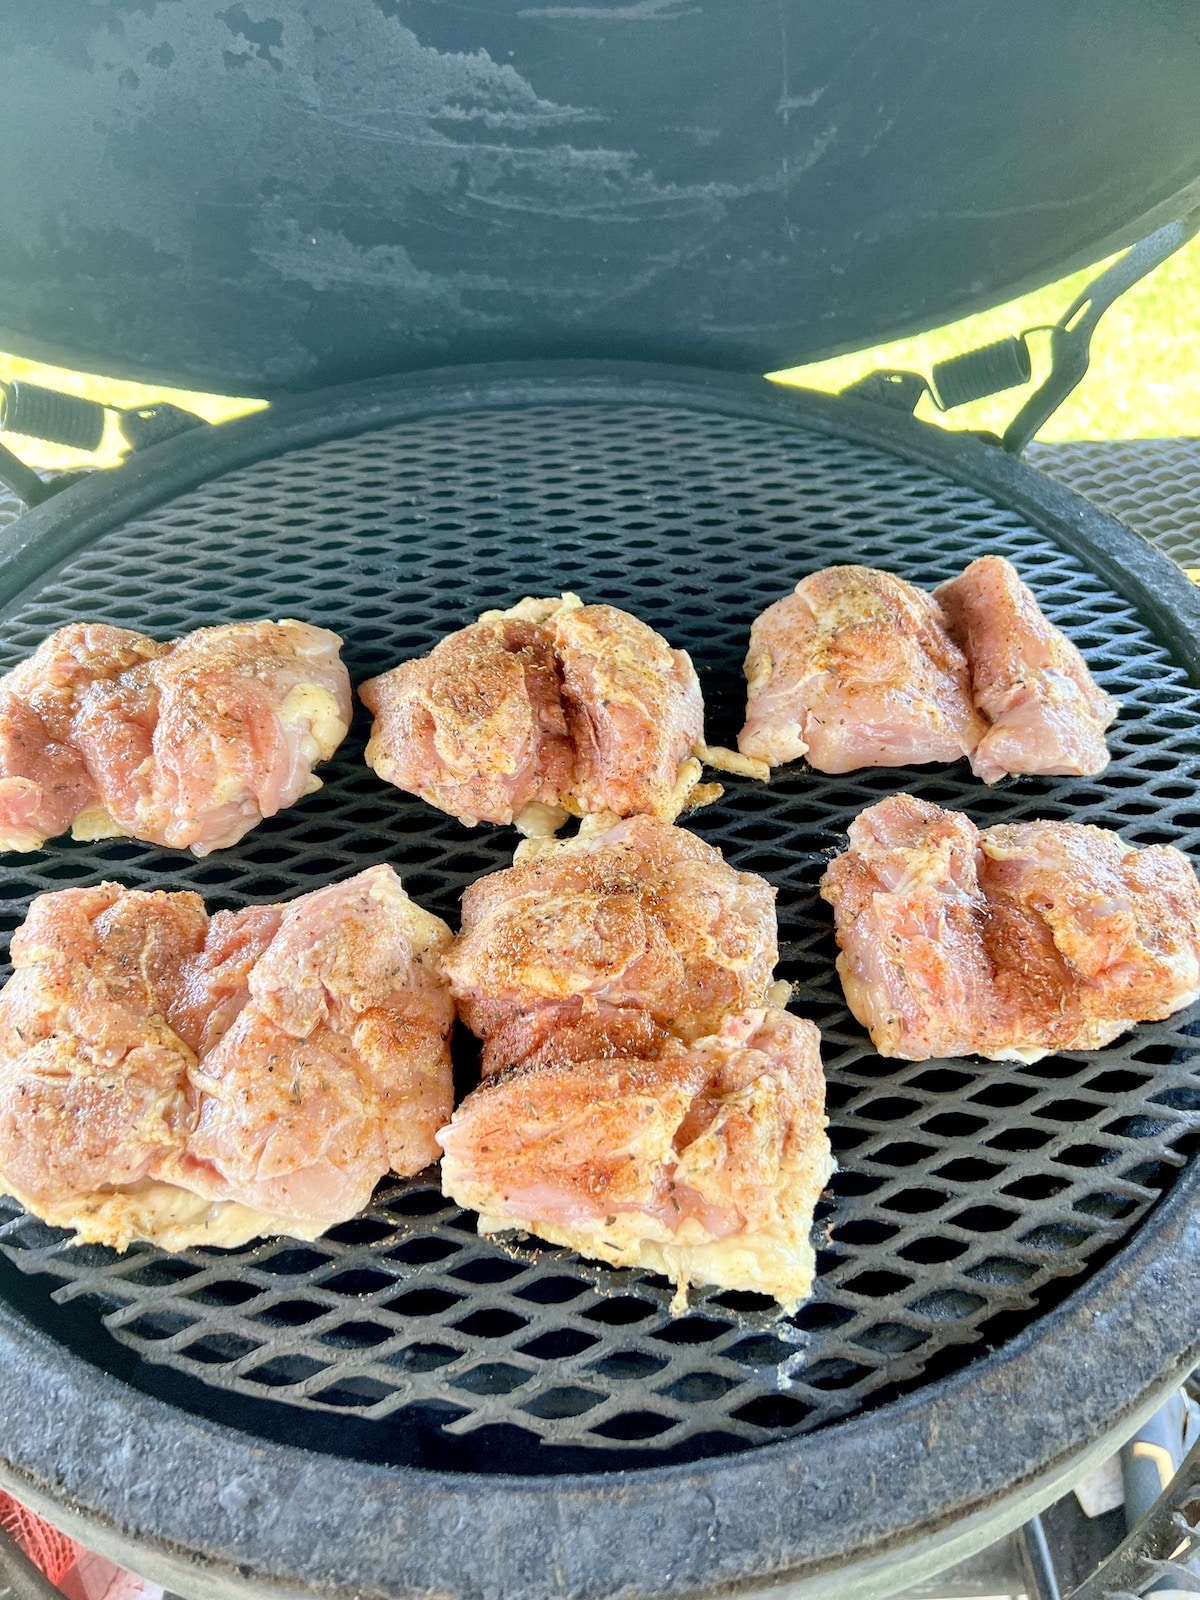 Grilling chicken thighs.